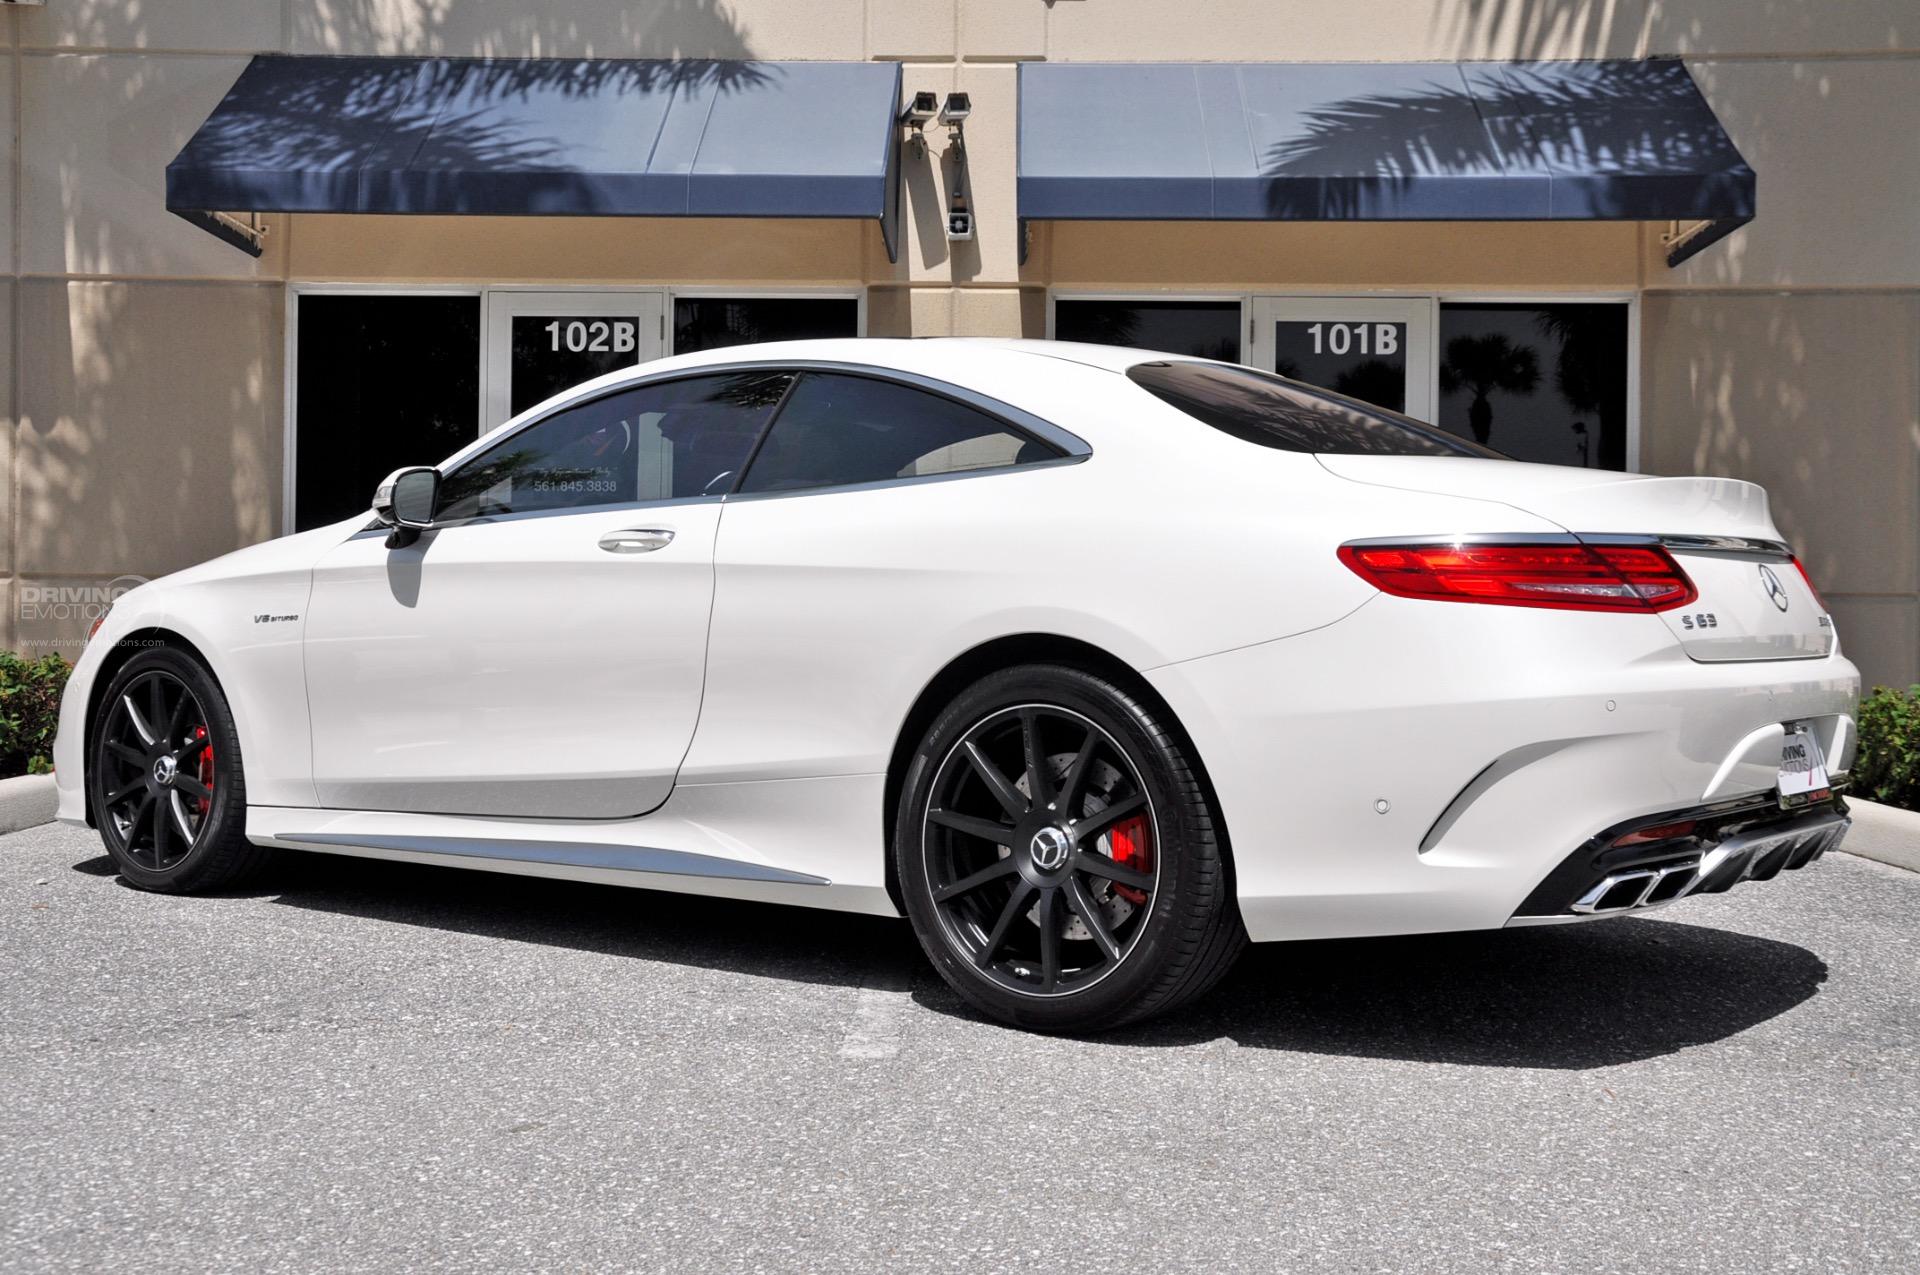 Used 2015 Mercedes-Benz S63 AMG 4MATIC Coupe S63 AMG Lake Park, FL.